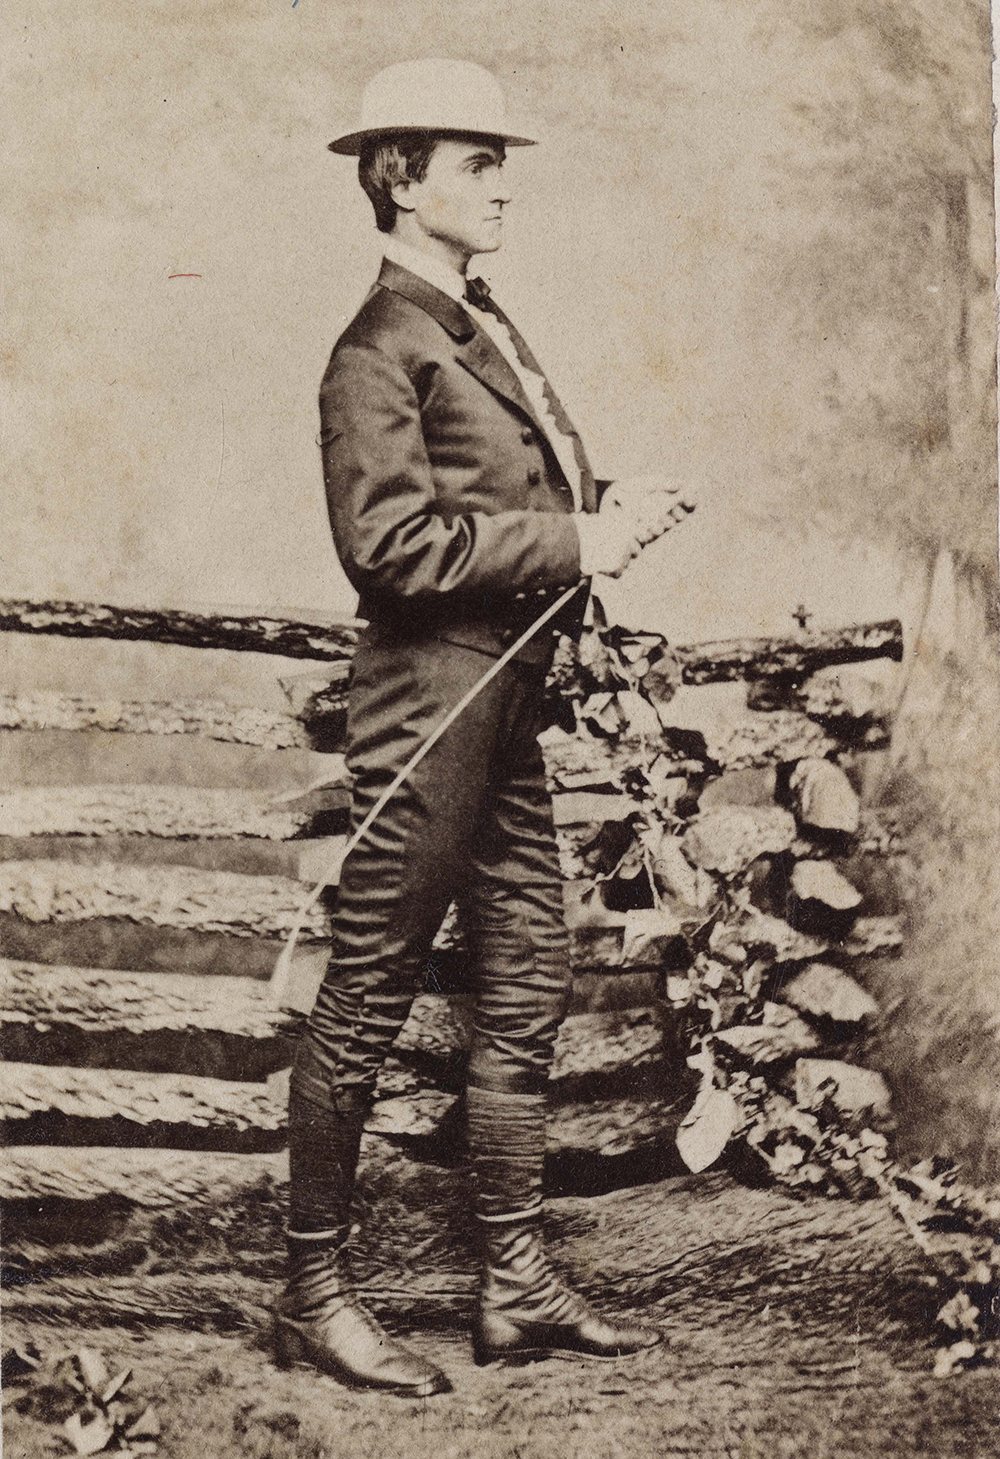 Promotional photograph of Edward Payson Weston, New York, c.1860. Transcendental Graphics/Getty Images